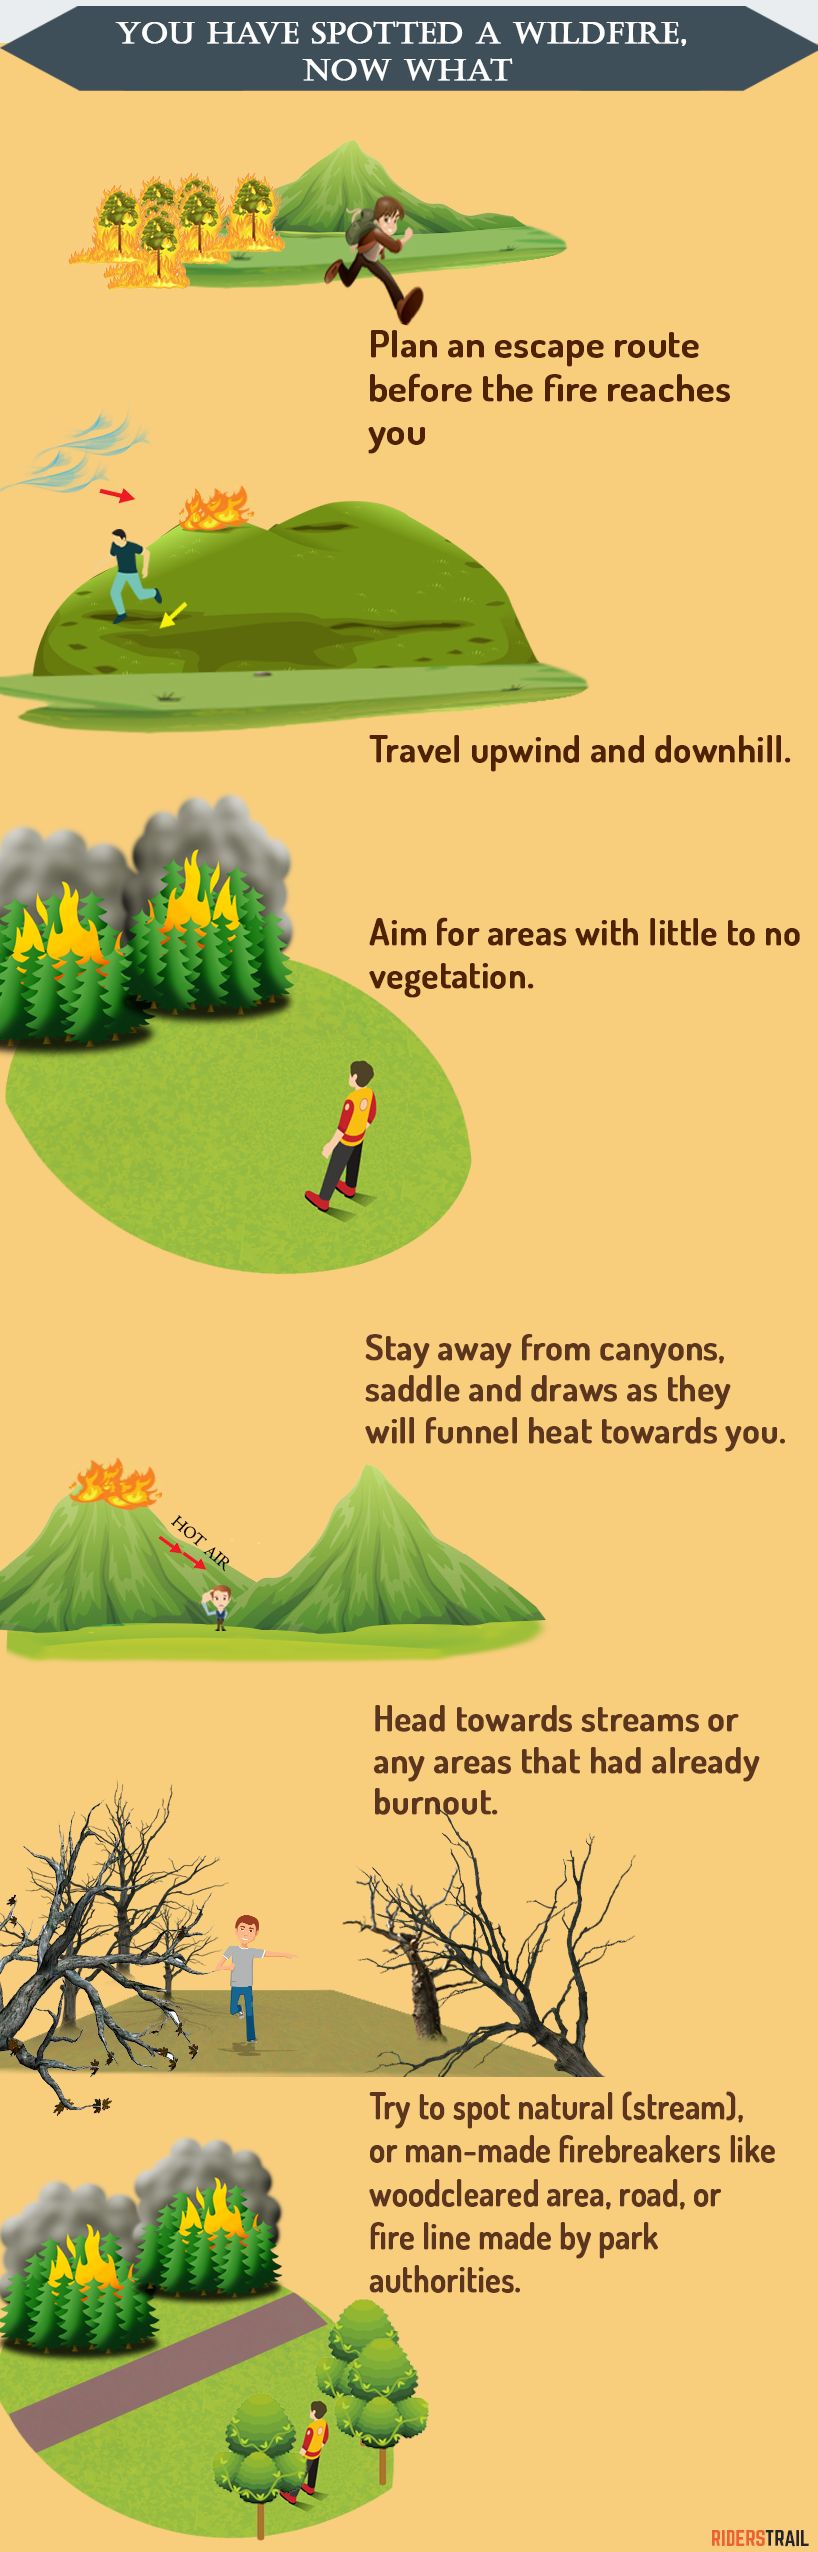 Tips to prepare for hiking